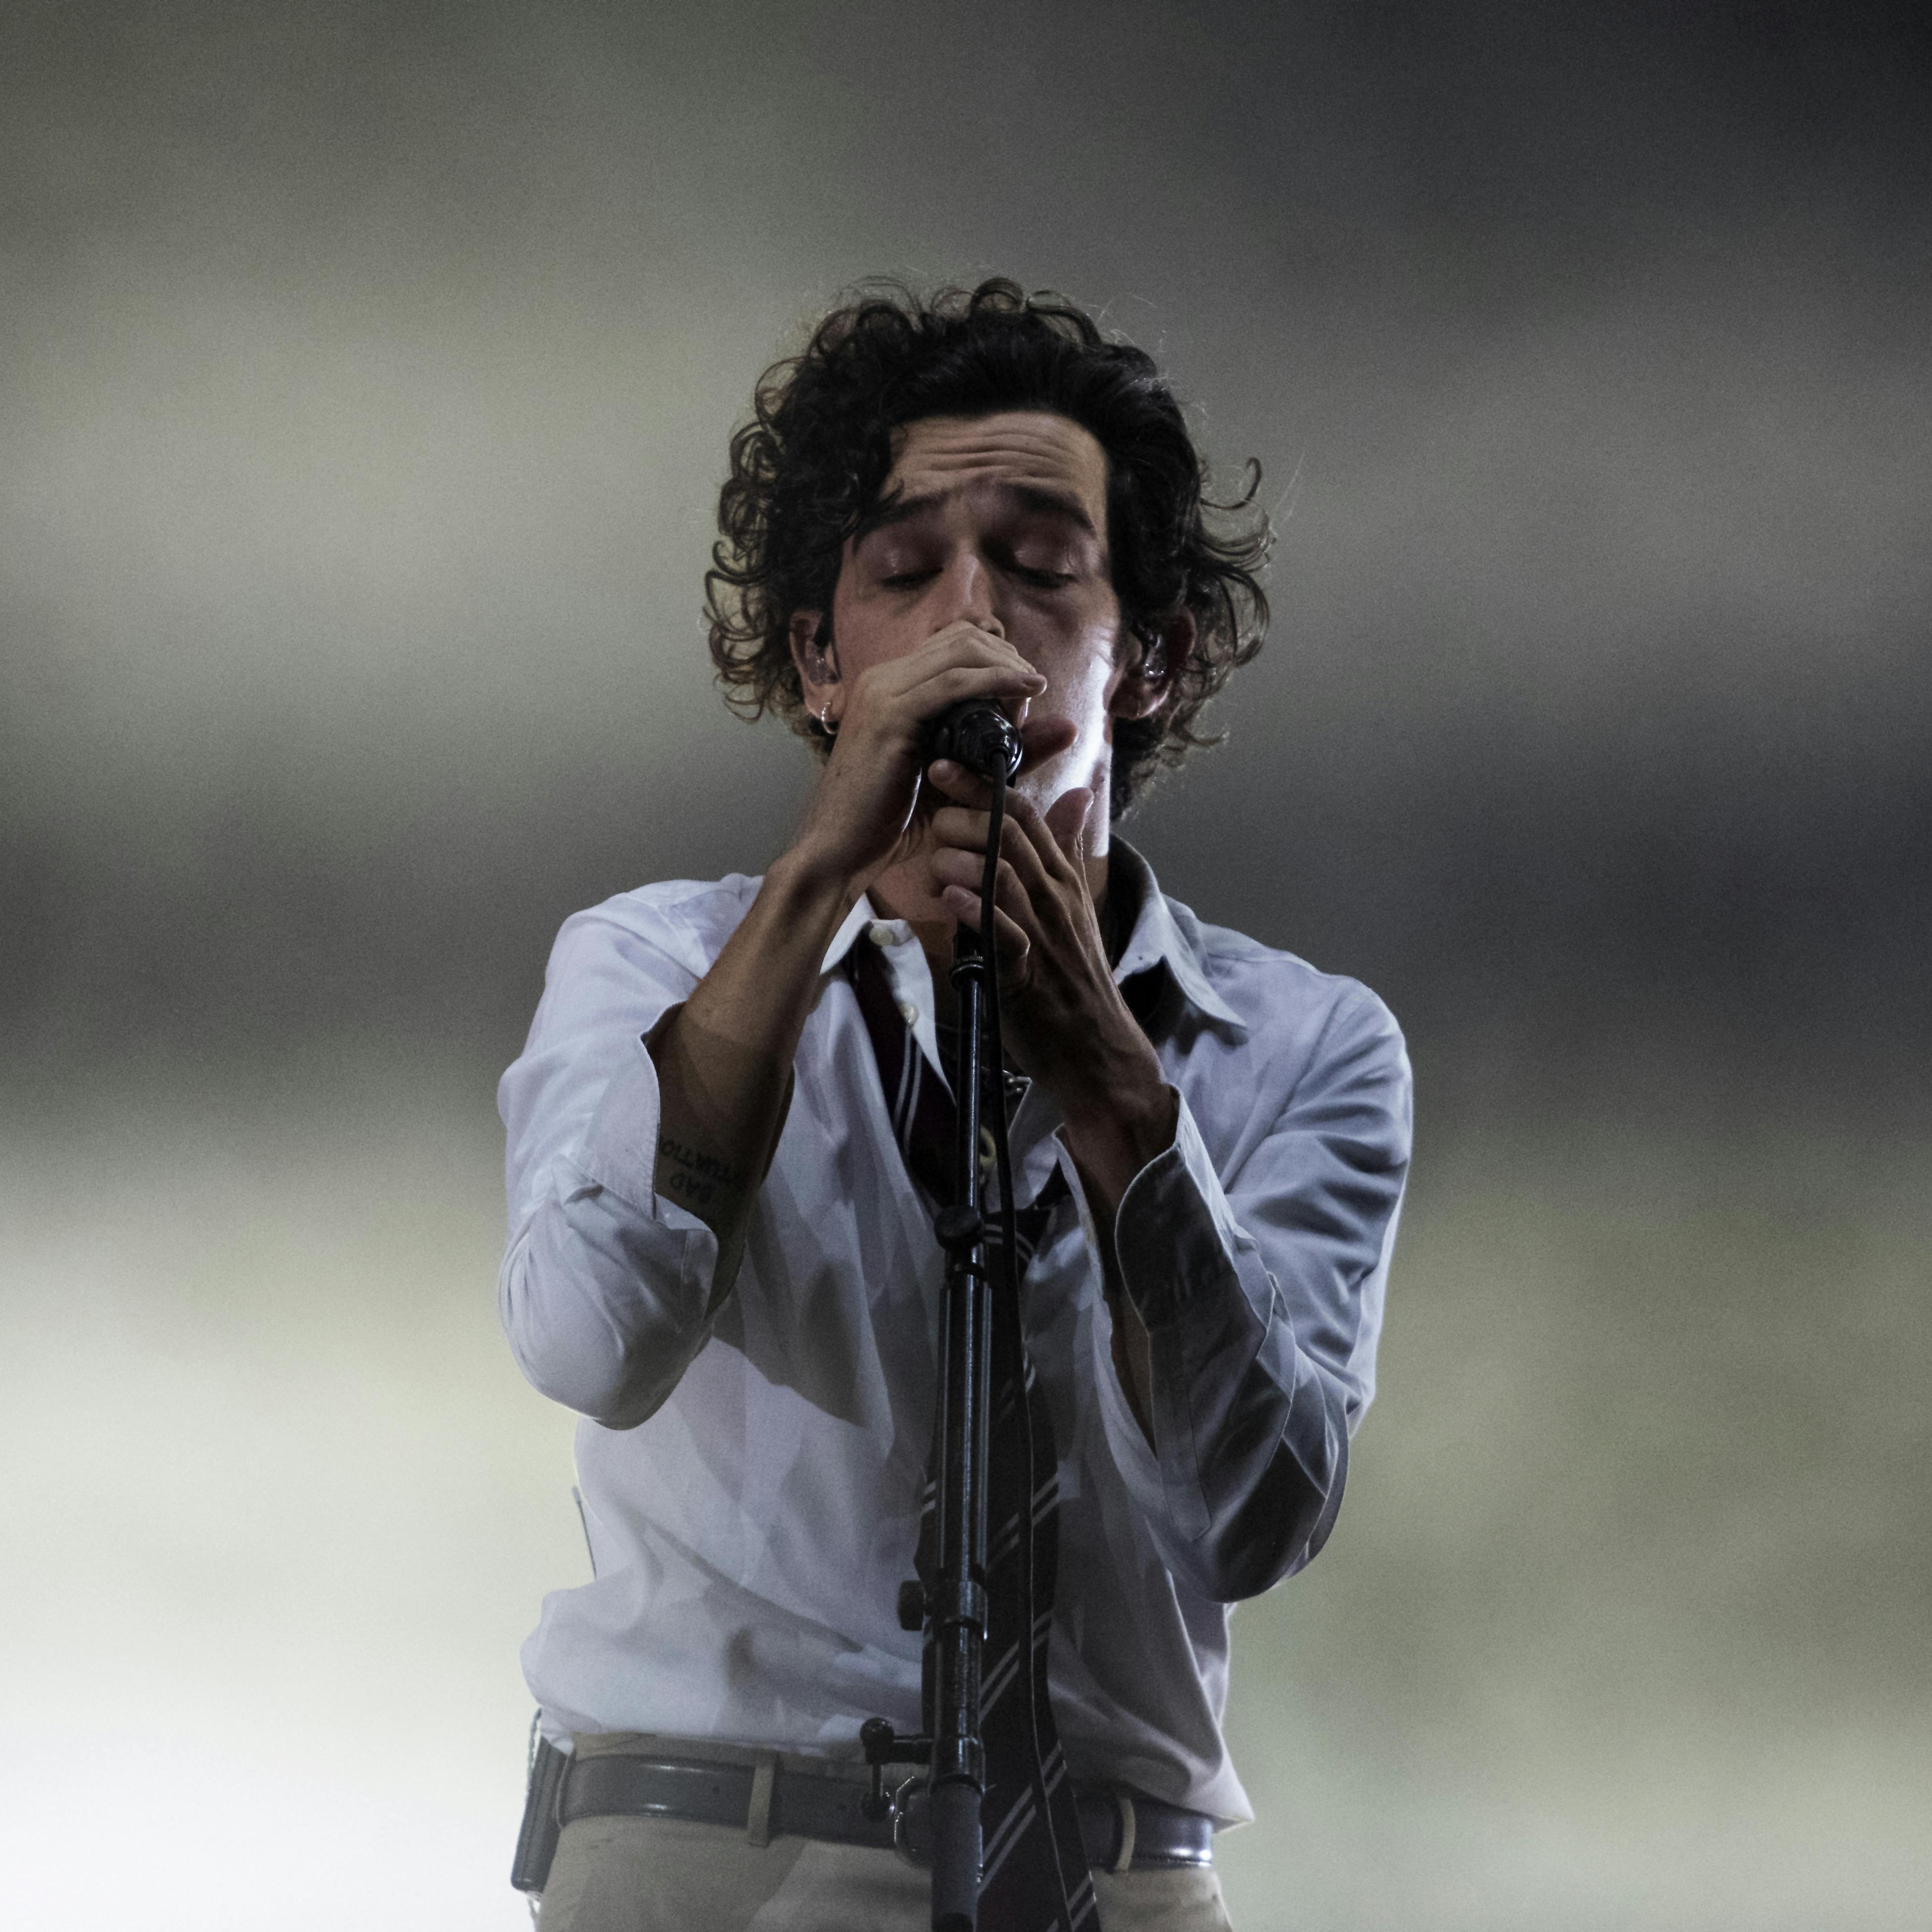 The leader singer of British pop rock band The 1975, Matt Healy, performs on the second day of the Benicassim International Music Festival (FIB) in Benicassim, Spain, early on July 20, 2019. JOSE JORDAN / AFP